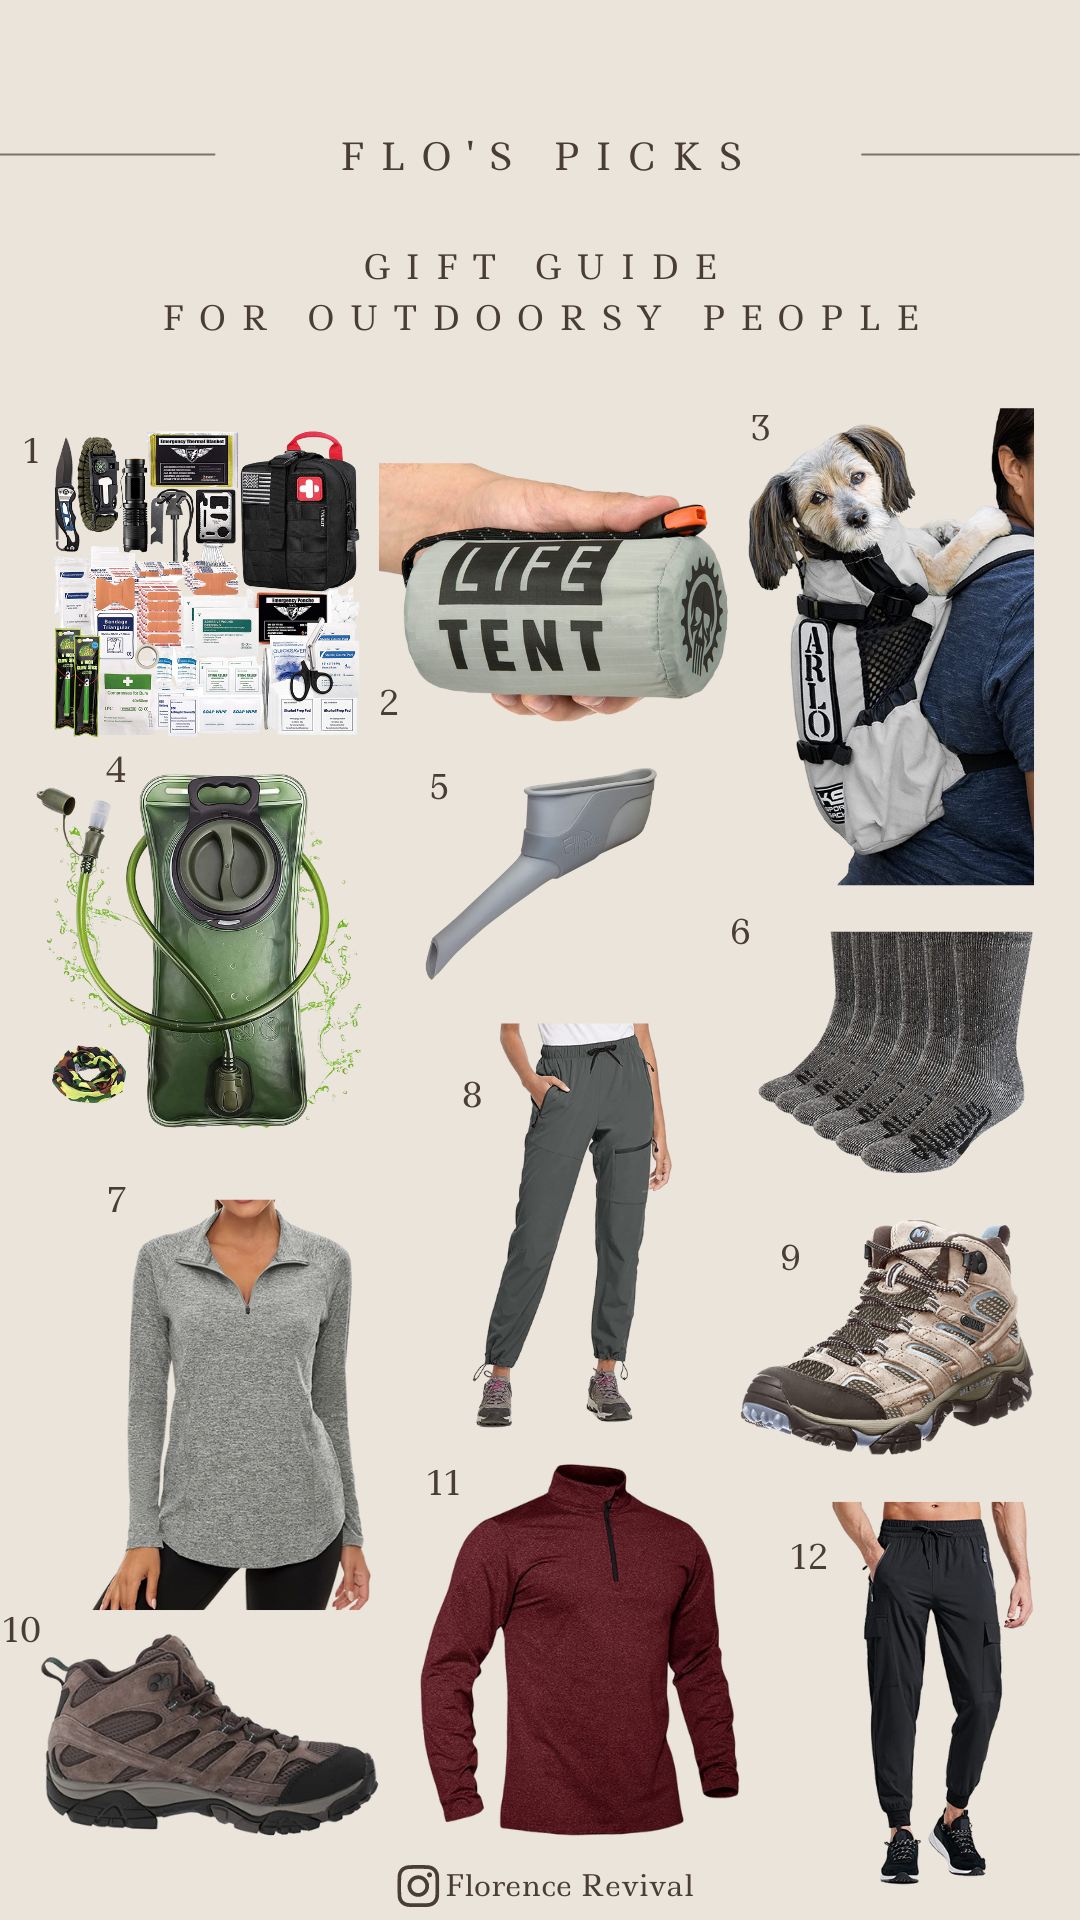 Photos of the items that are recommended in this gift guide for outdoorsy people.